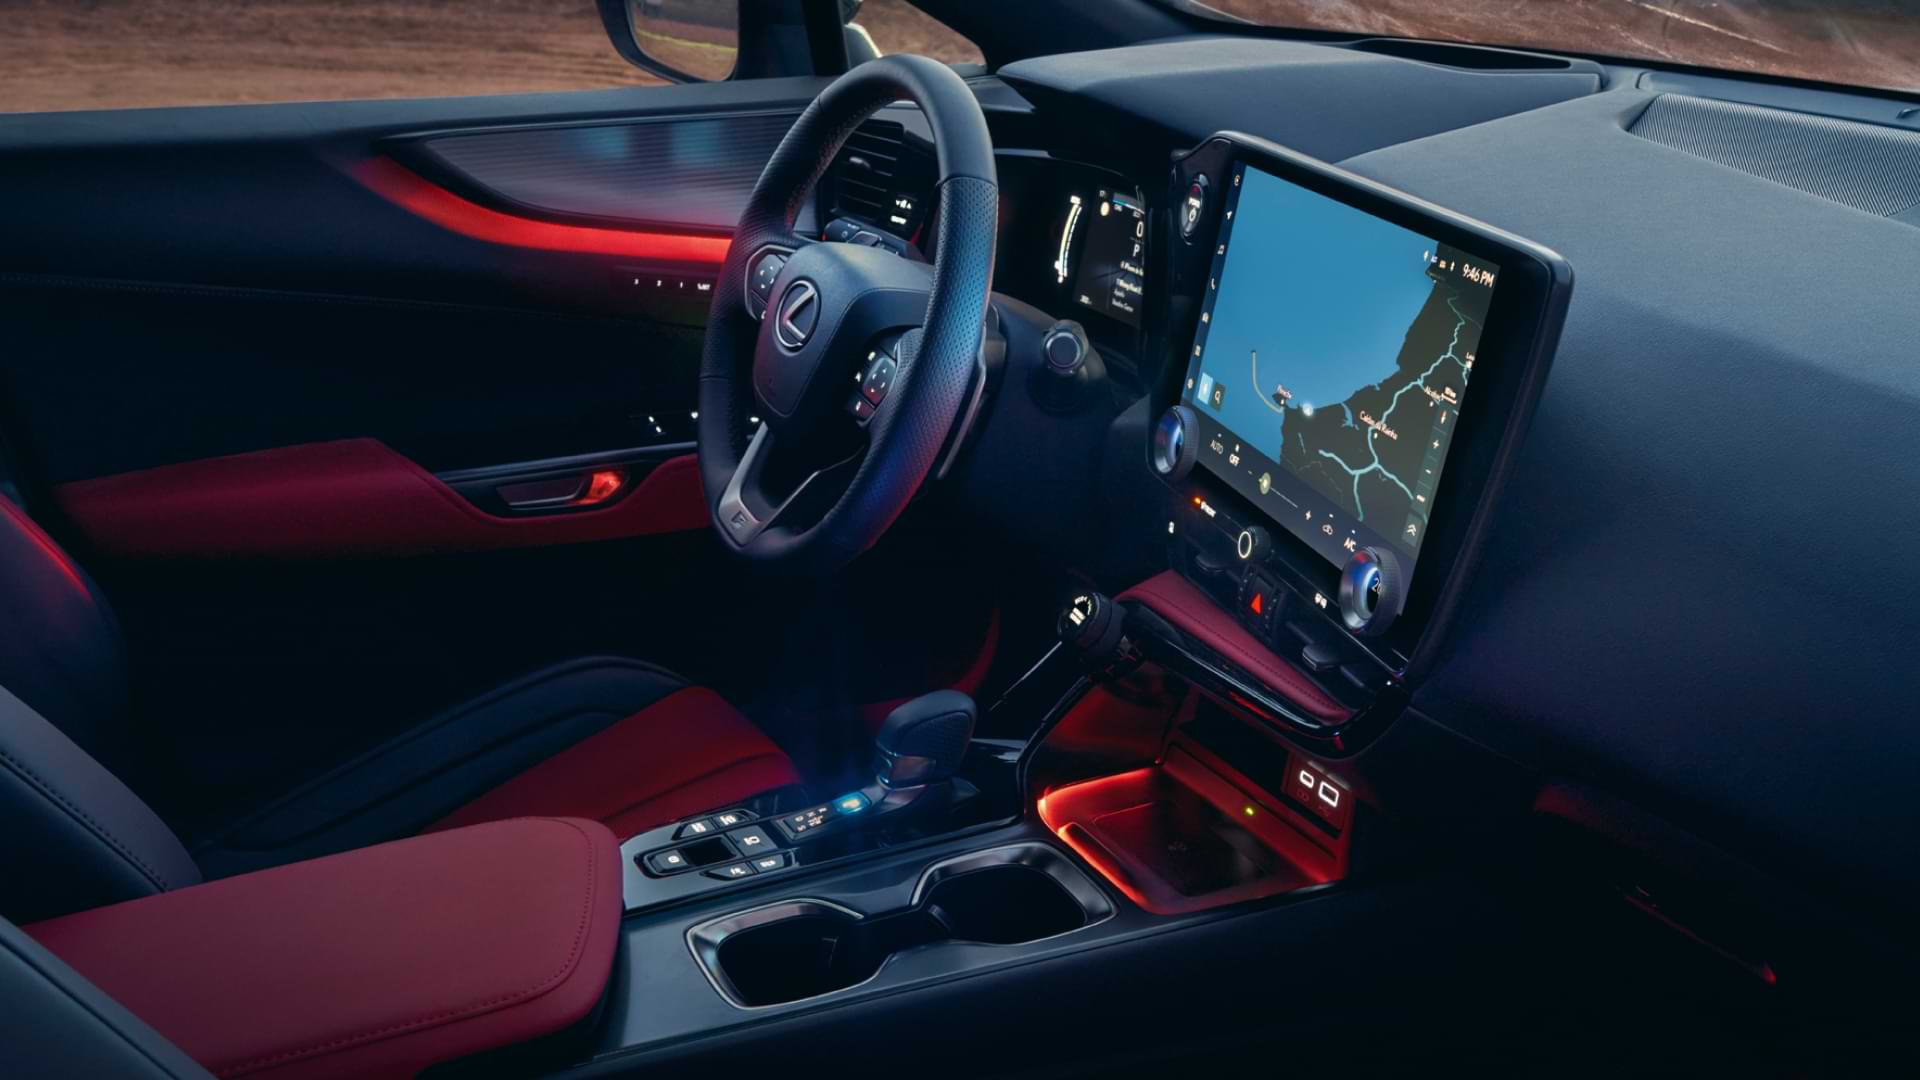 The red leather F Sport Interior of the NX.